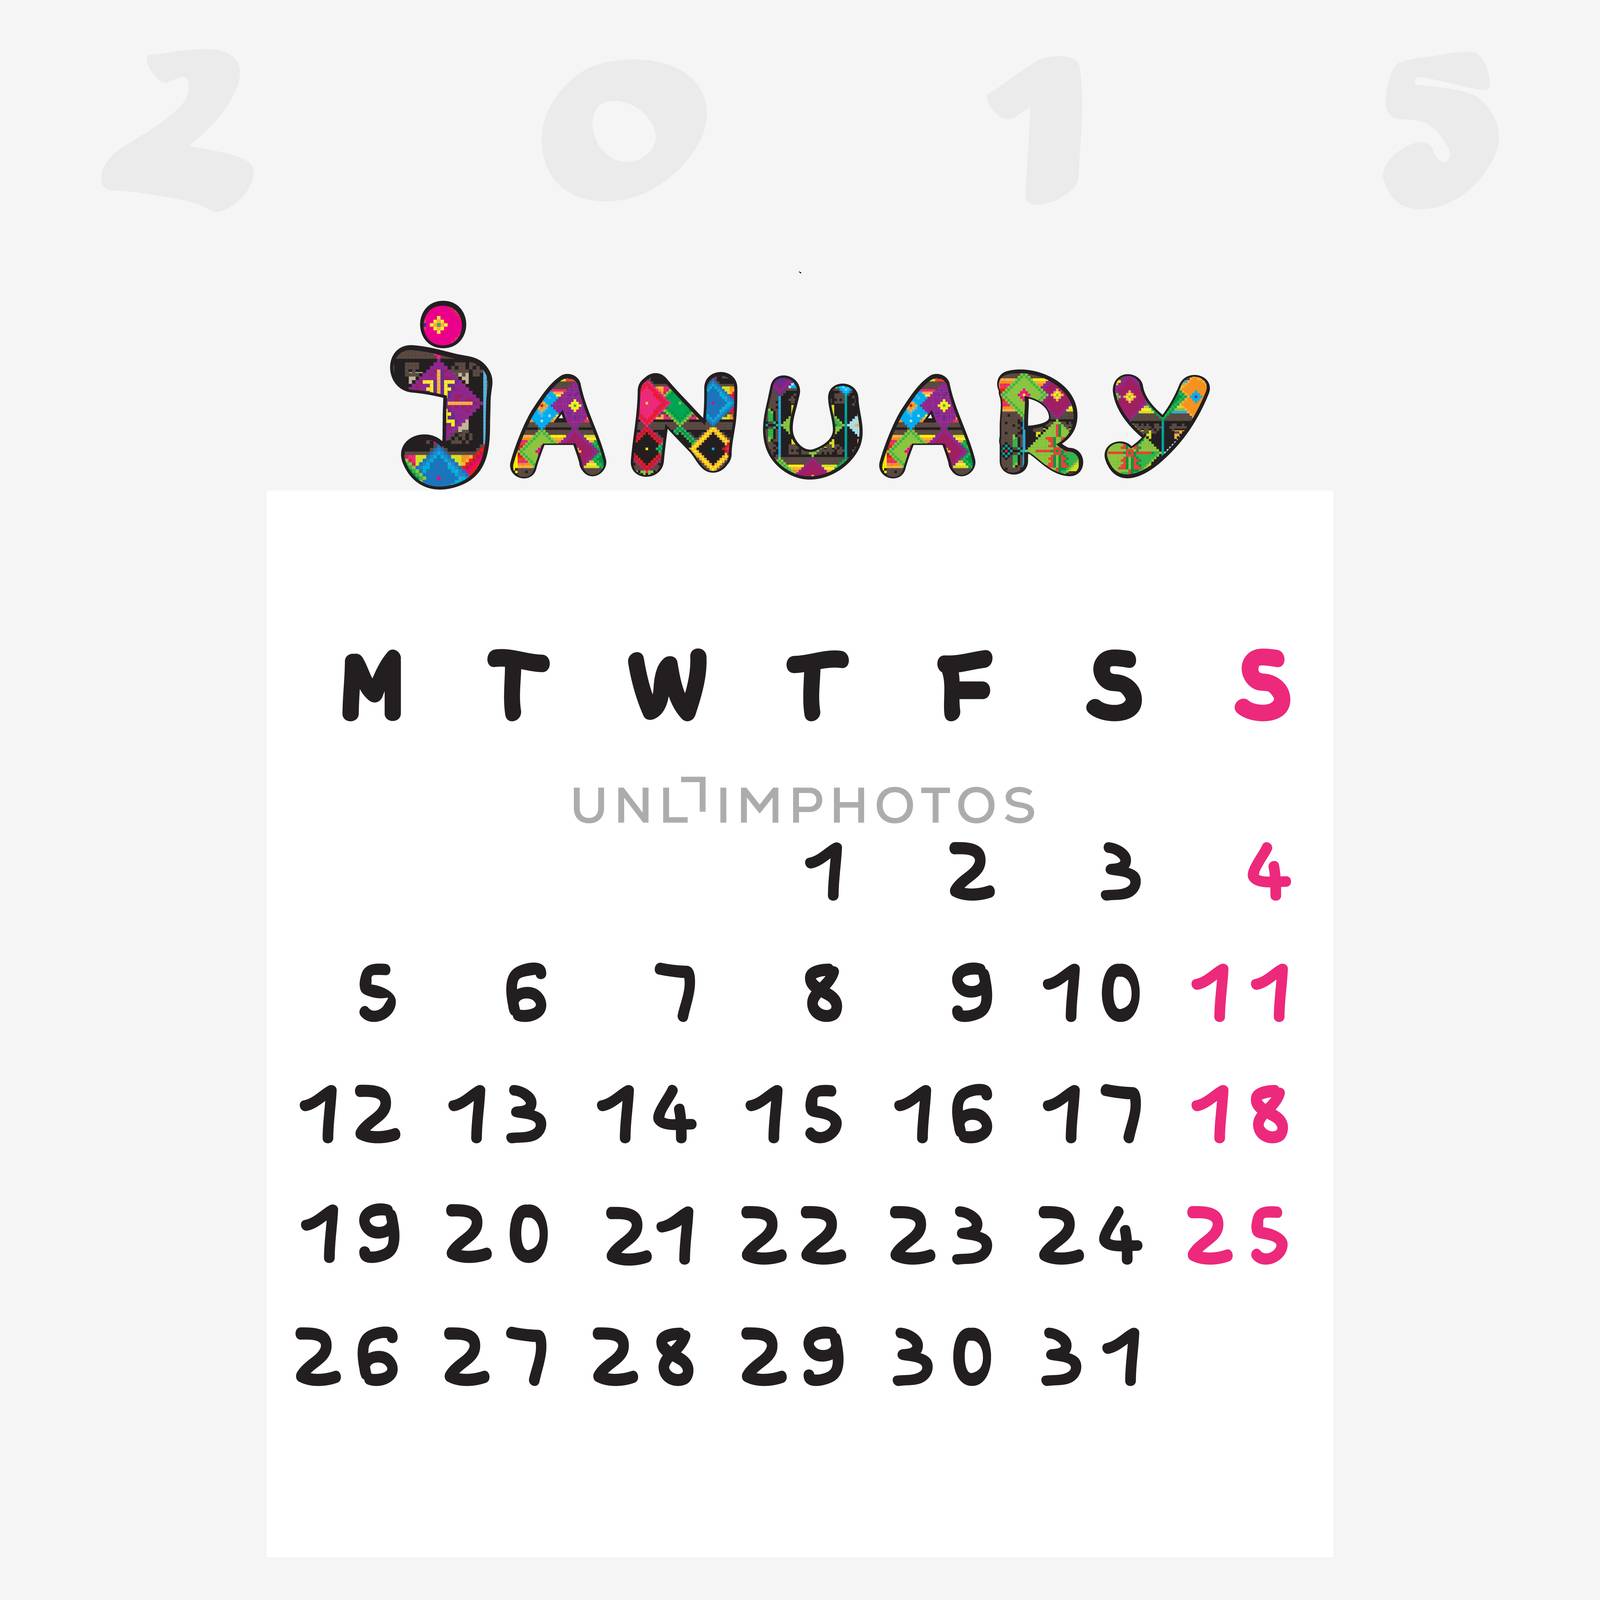 Calendar 2015, graphic illustration of January monthly calendar with original hand drawn text and colored capital letters for kids